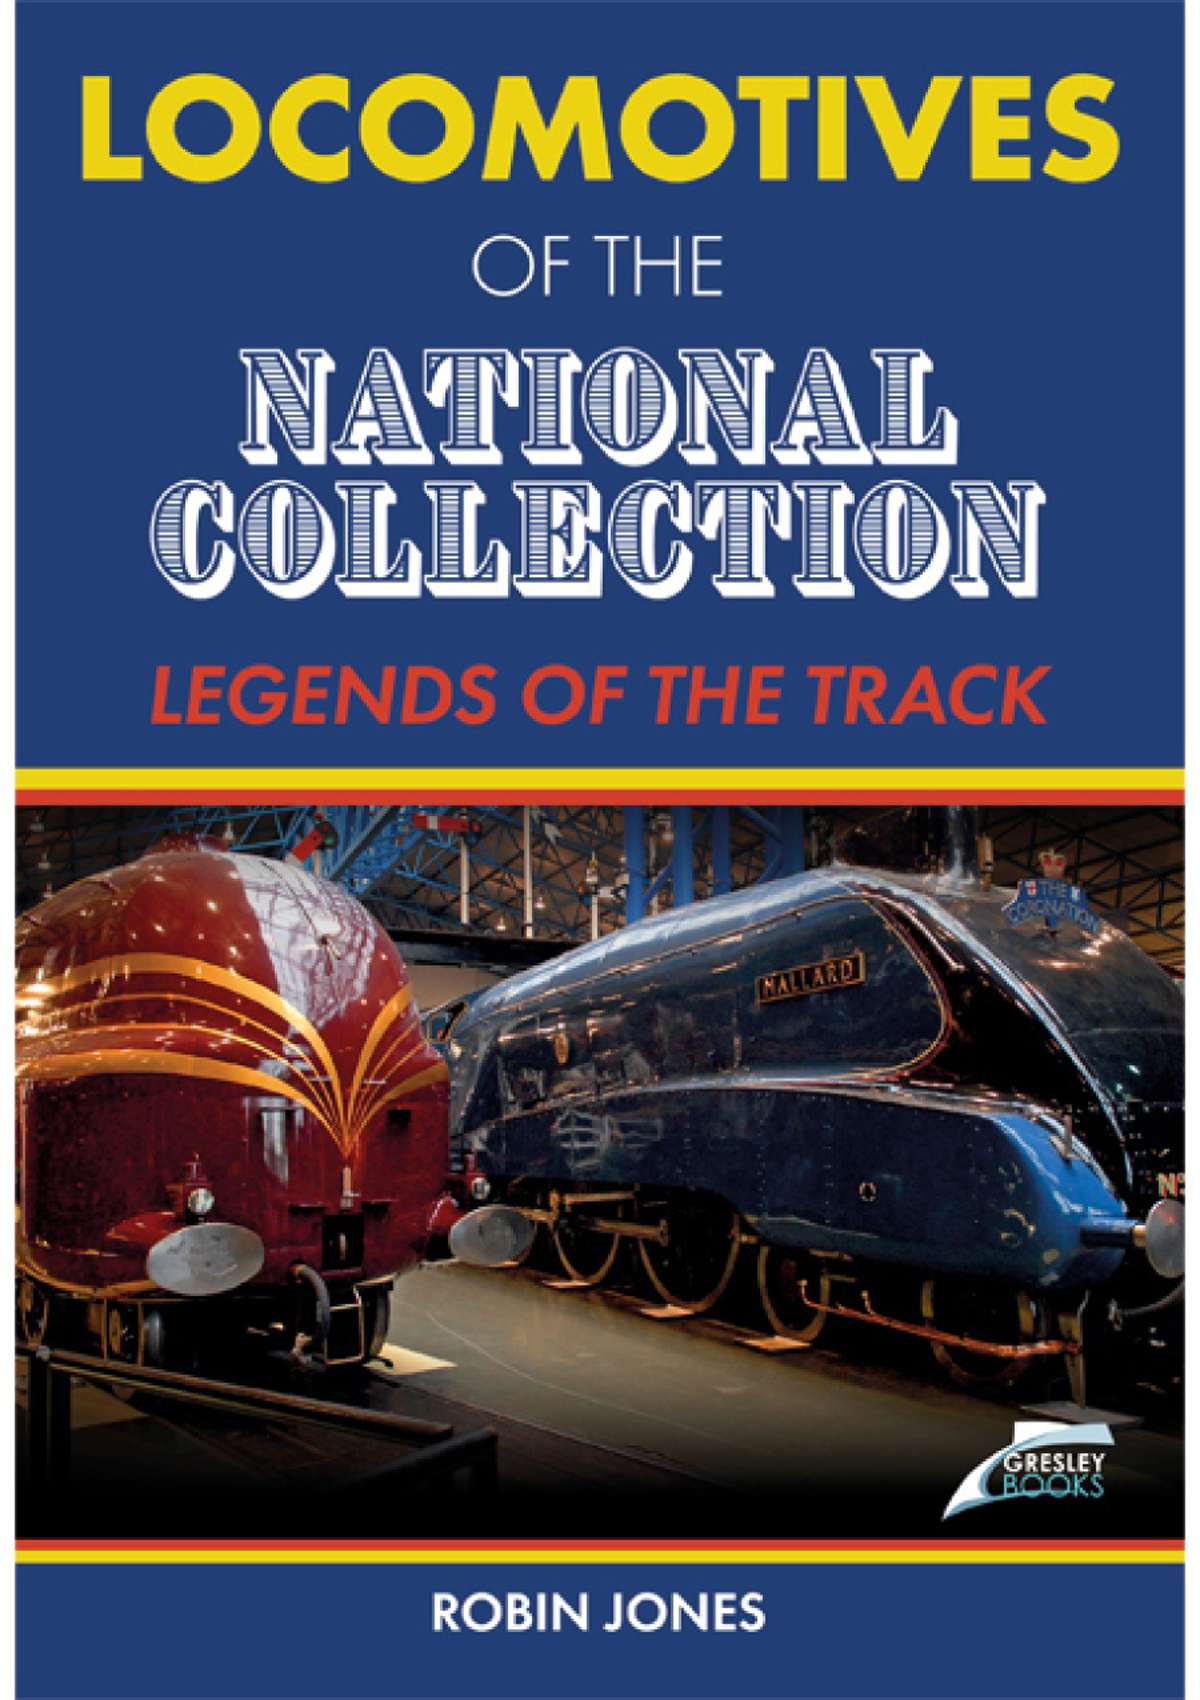 8573 - Locomotives of The National Collection